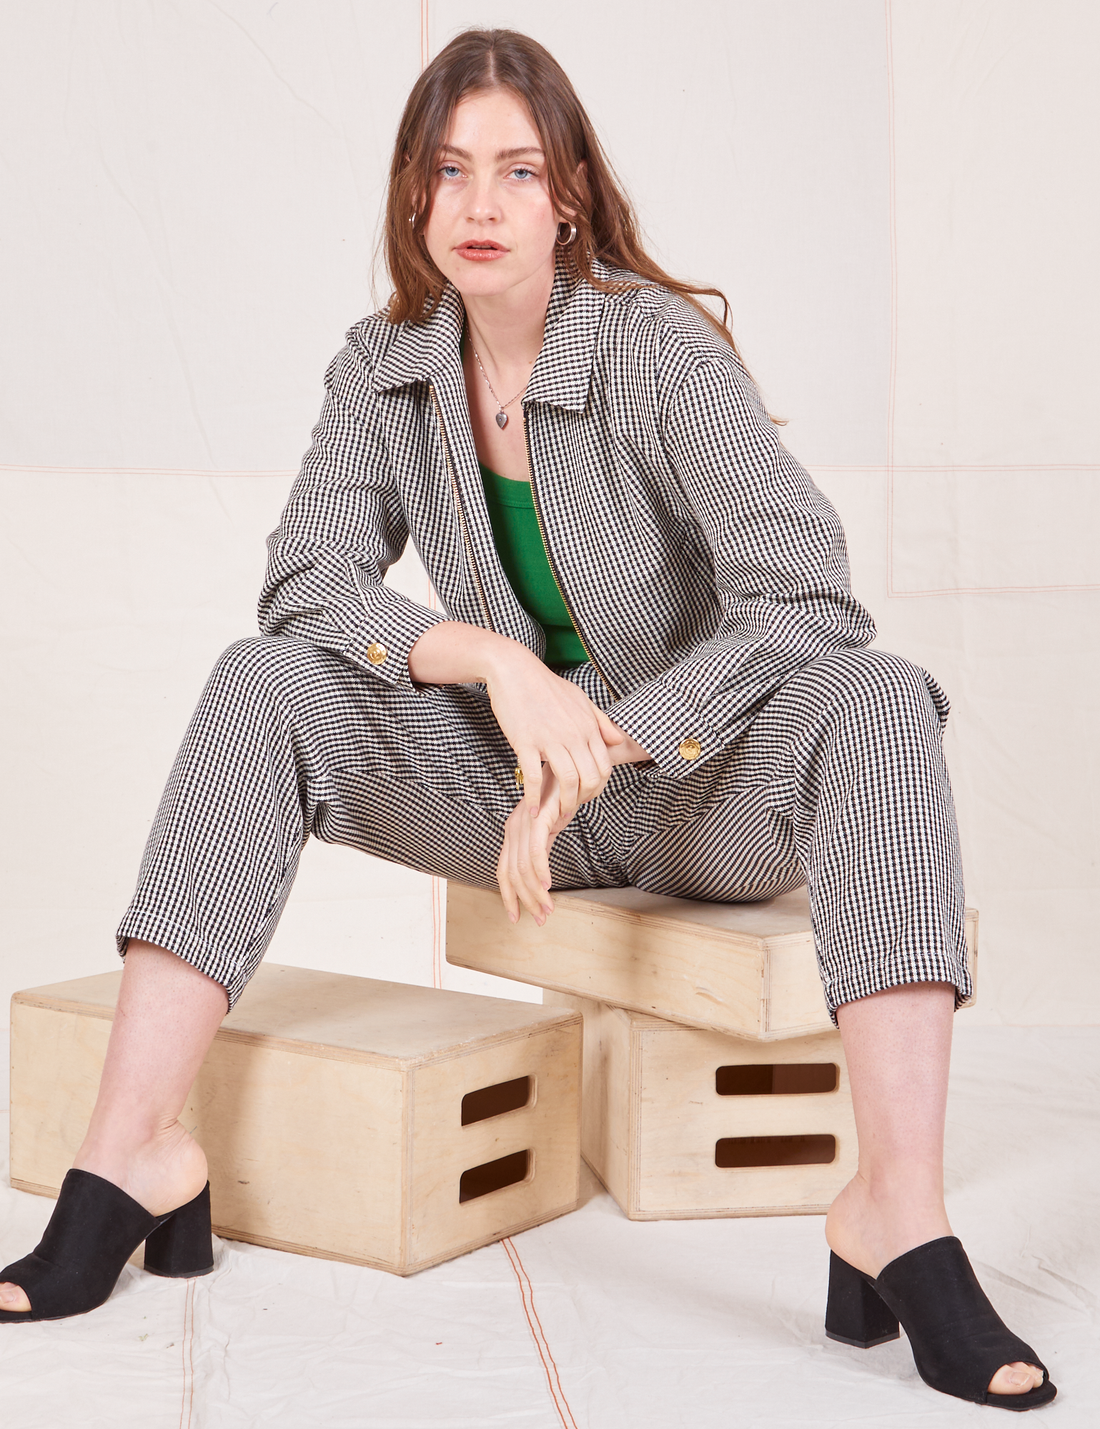 Ricky Jacket in Black & White Checker on Allison wearing matching trousers sitting on wooden crate